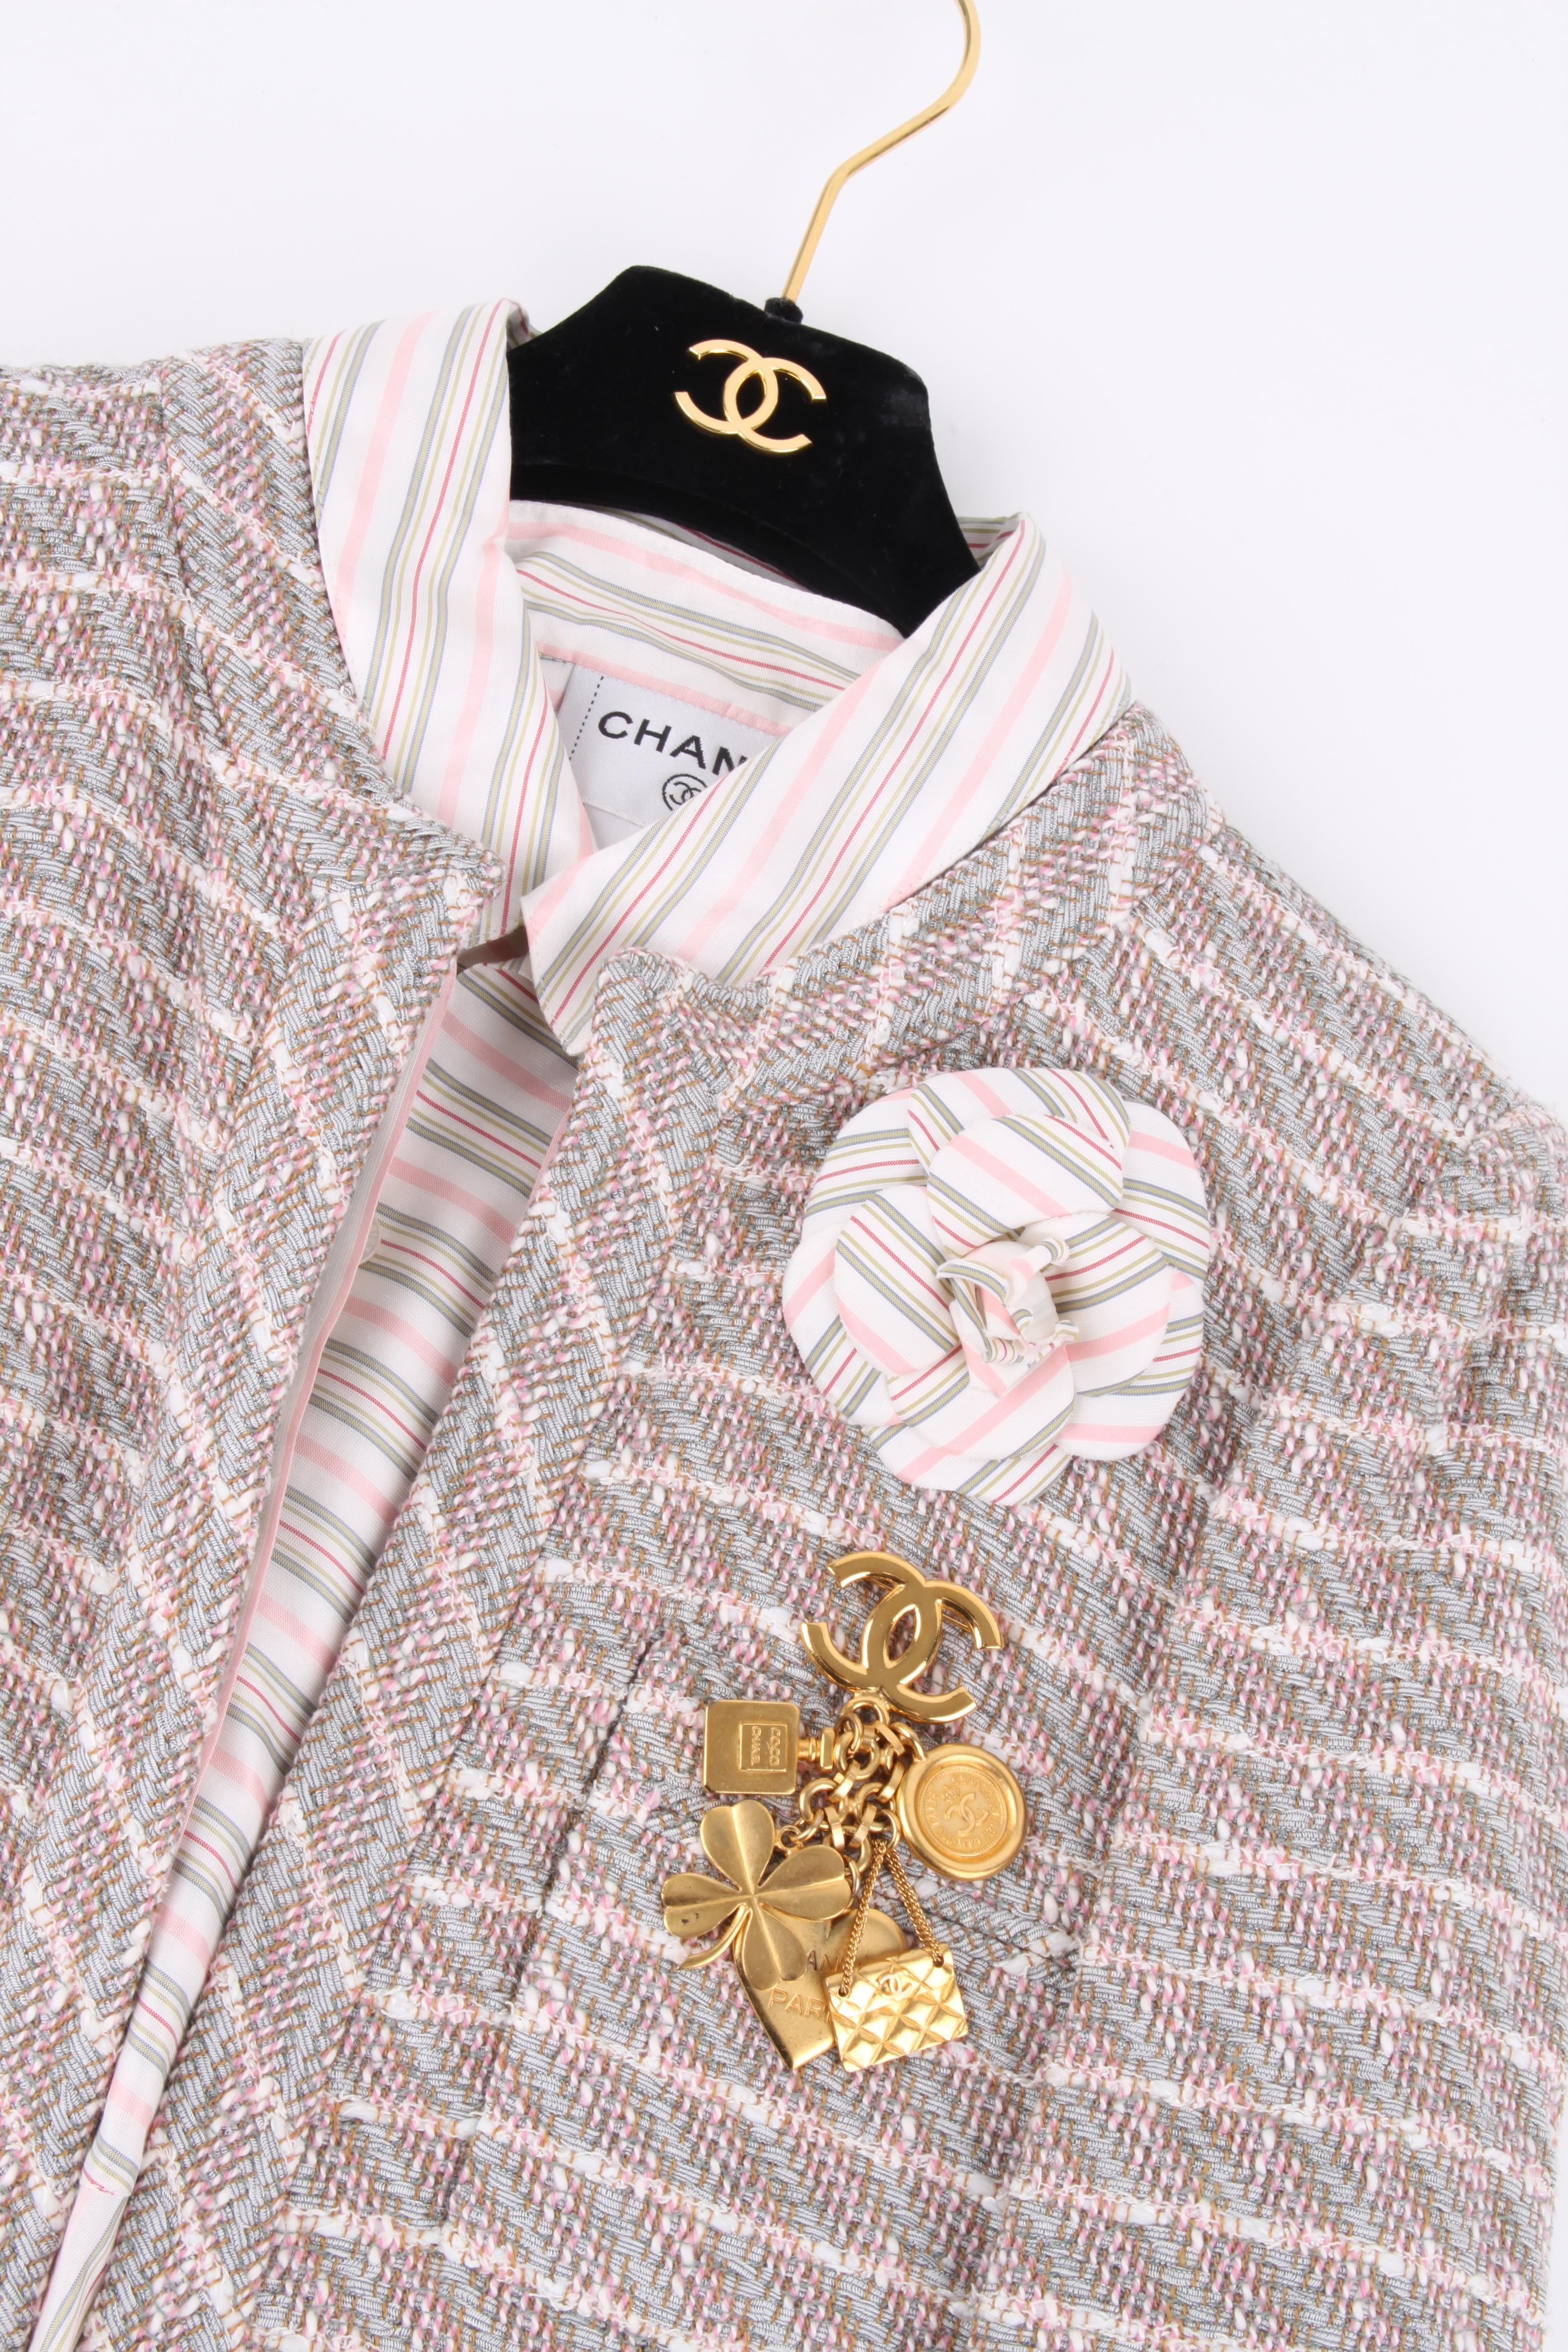 Sweet! This is the Chanel Iconic Lucky Charm Brooch, a vintage item!

An interlocking CC logo on top, the pin is attached on the back. Underneath five dangling charms in different sizes. A perfume bottle, a clover, a 2.55 flap bag, a heart and a